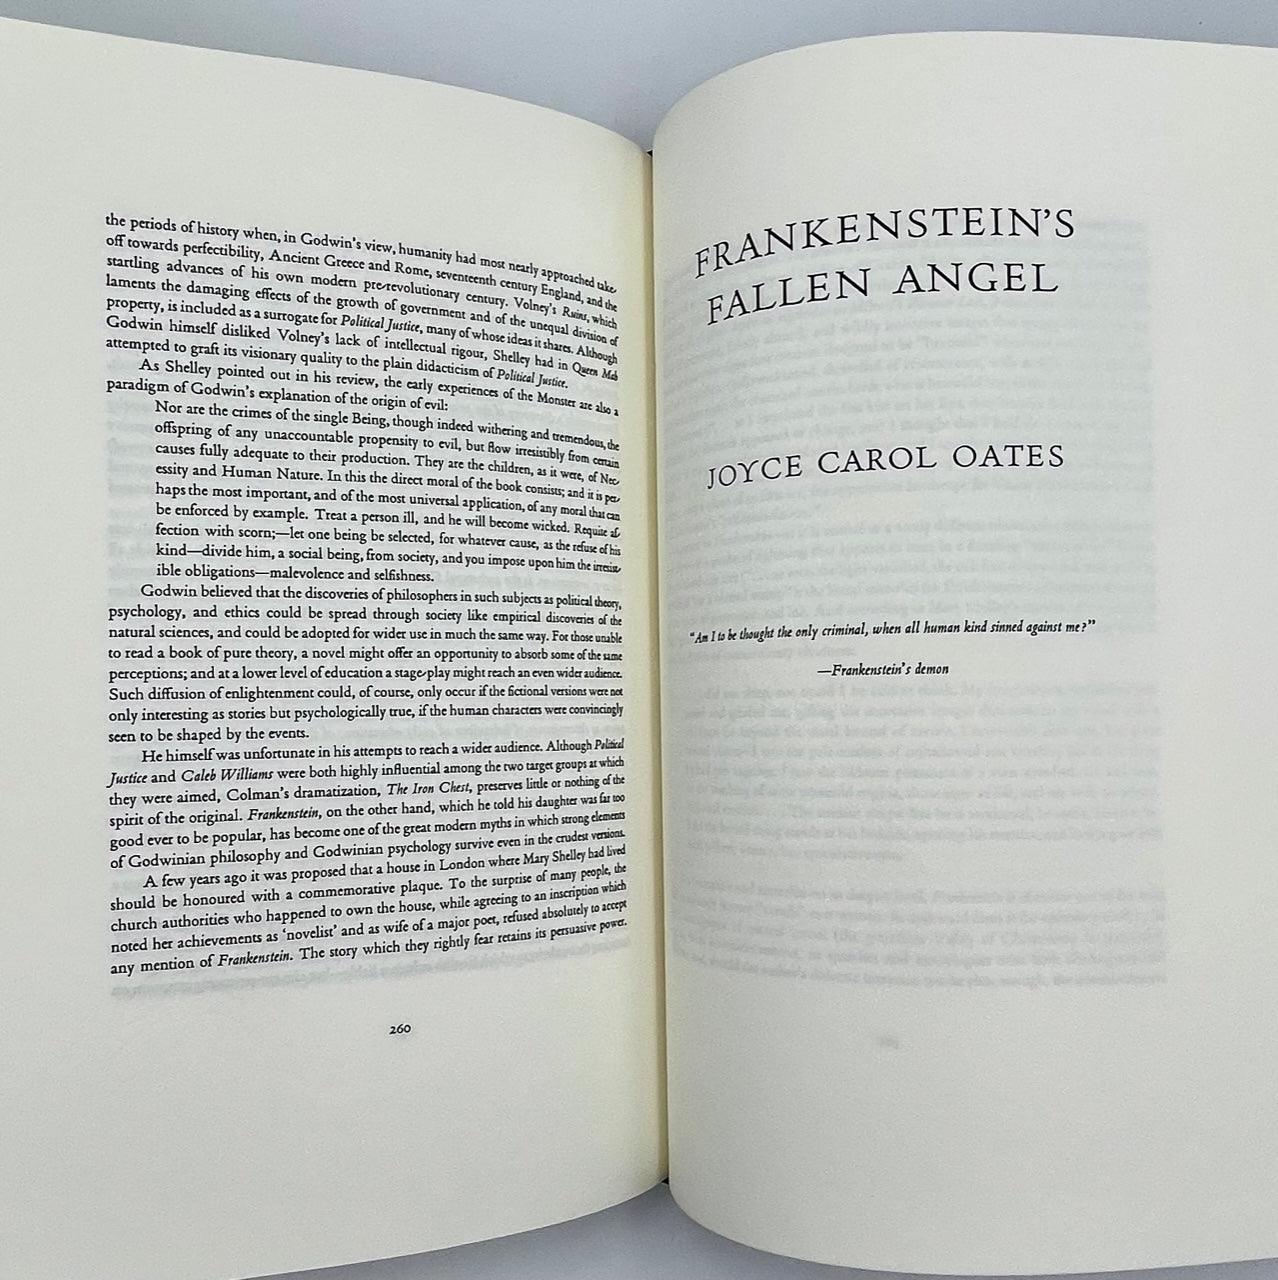 Frankenstein; or, The Modern Prometheus (Signed, Deluxe Pennyroyal Edition) - Grinning Cat Books - LITERATURE - BARRY MOSER